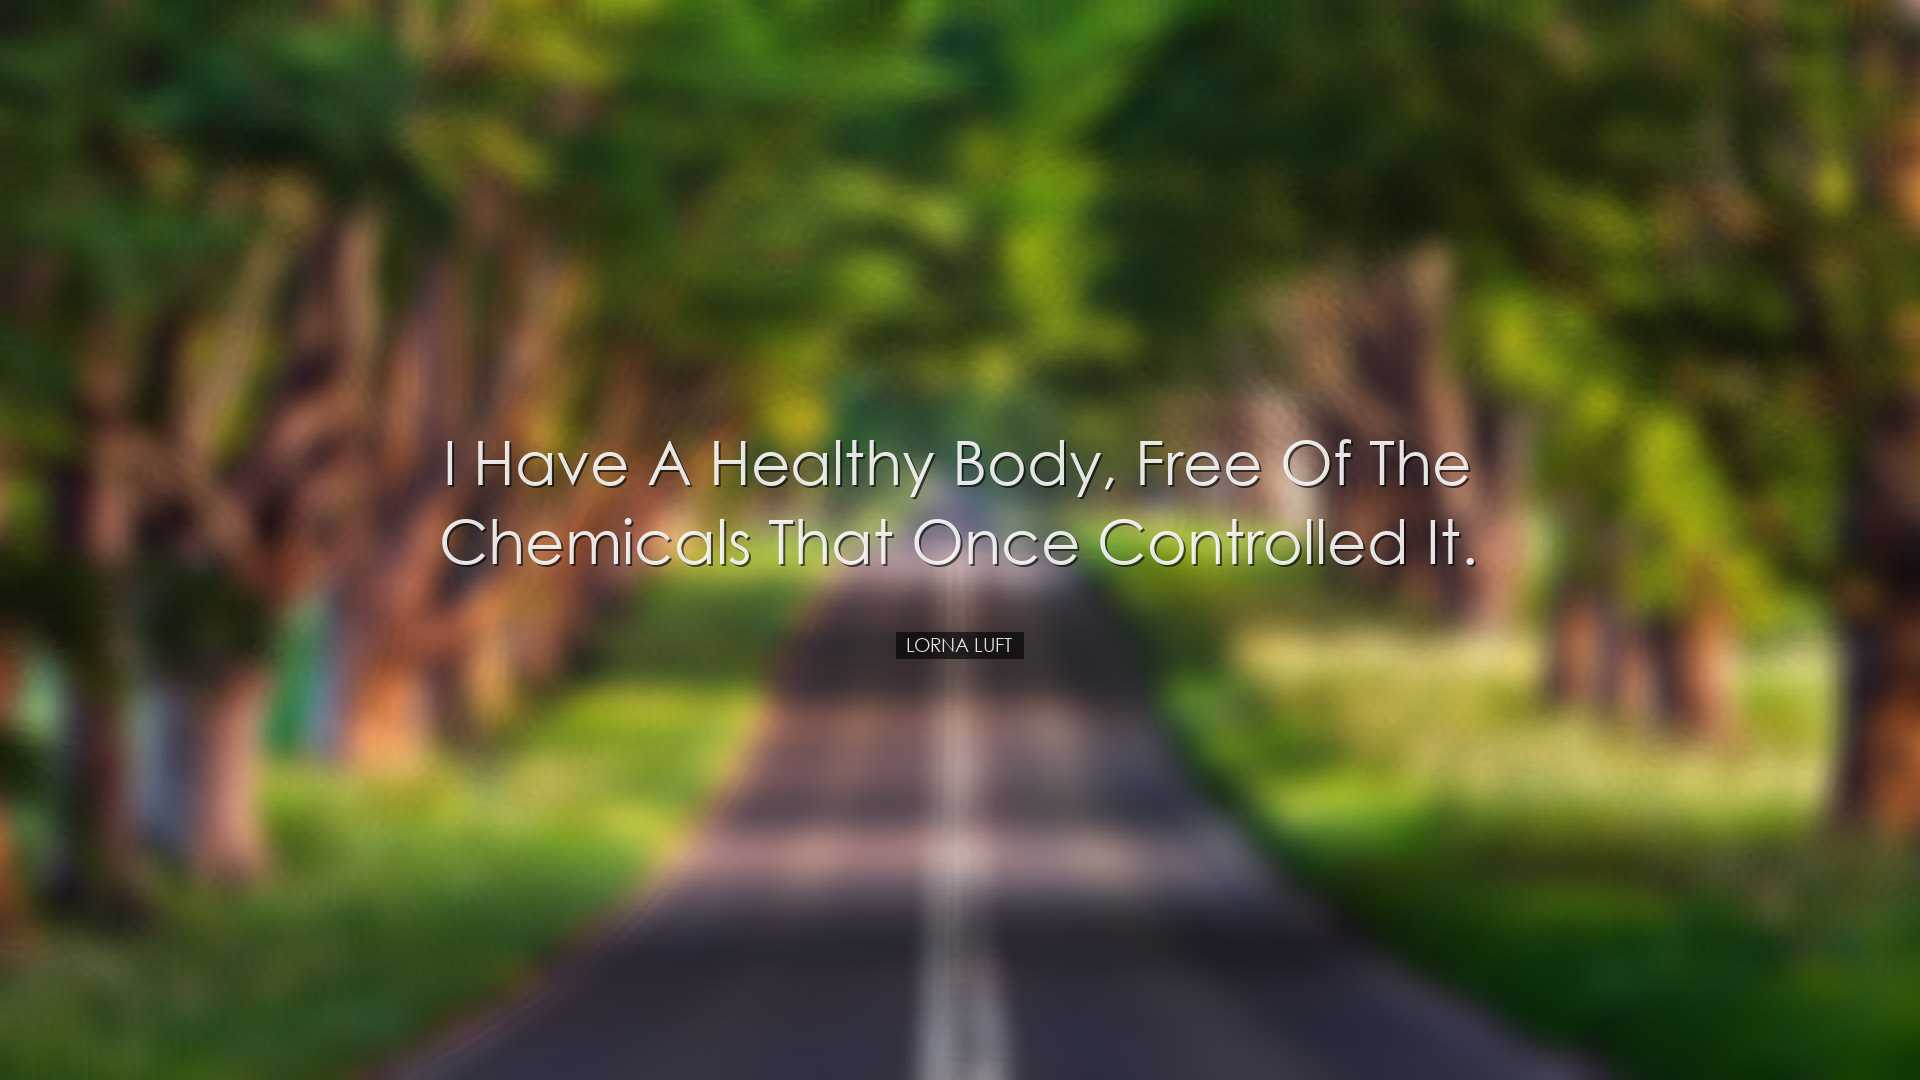 I have a healthy body, free of the chemicals that once controlled